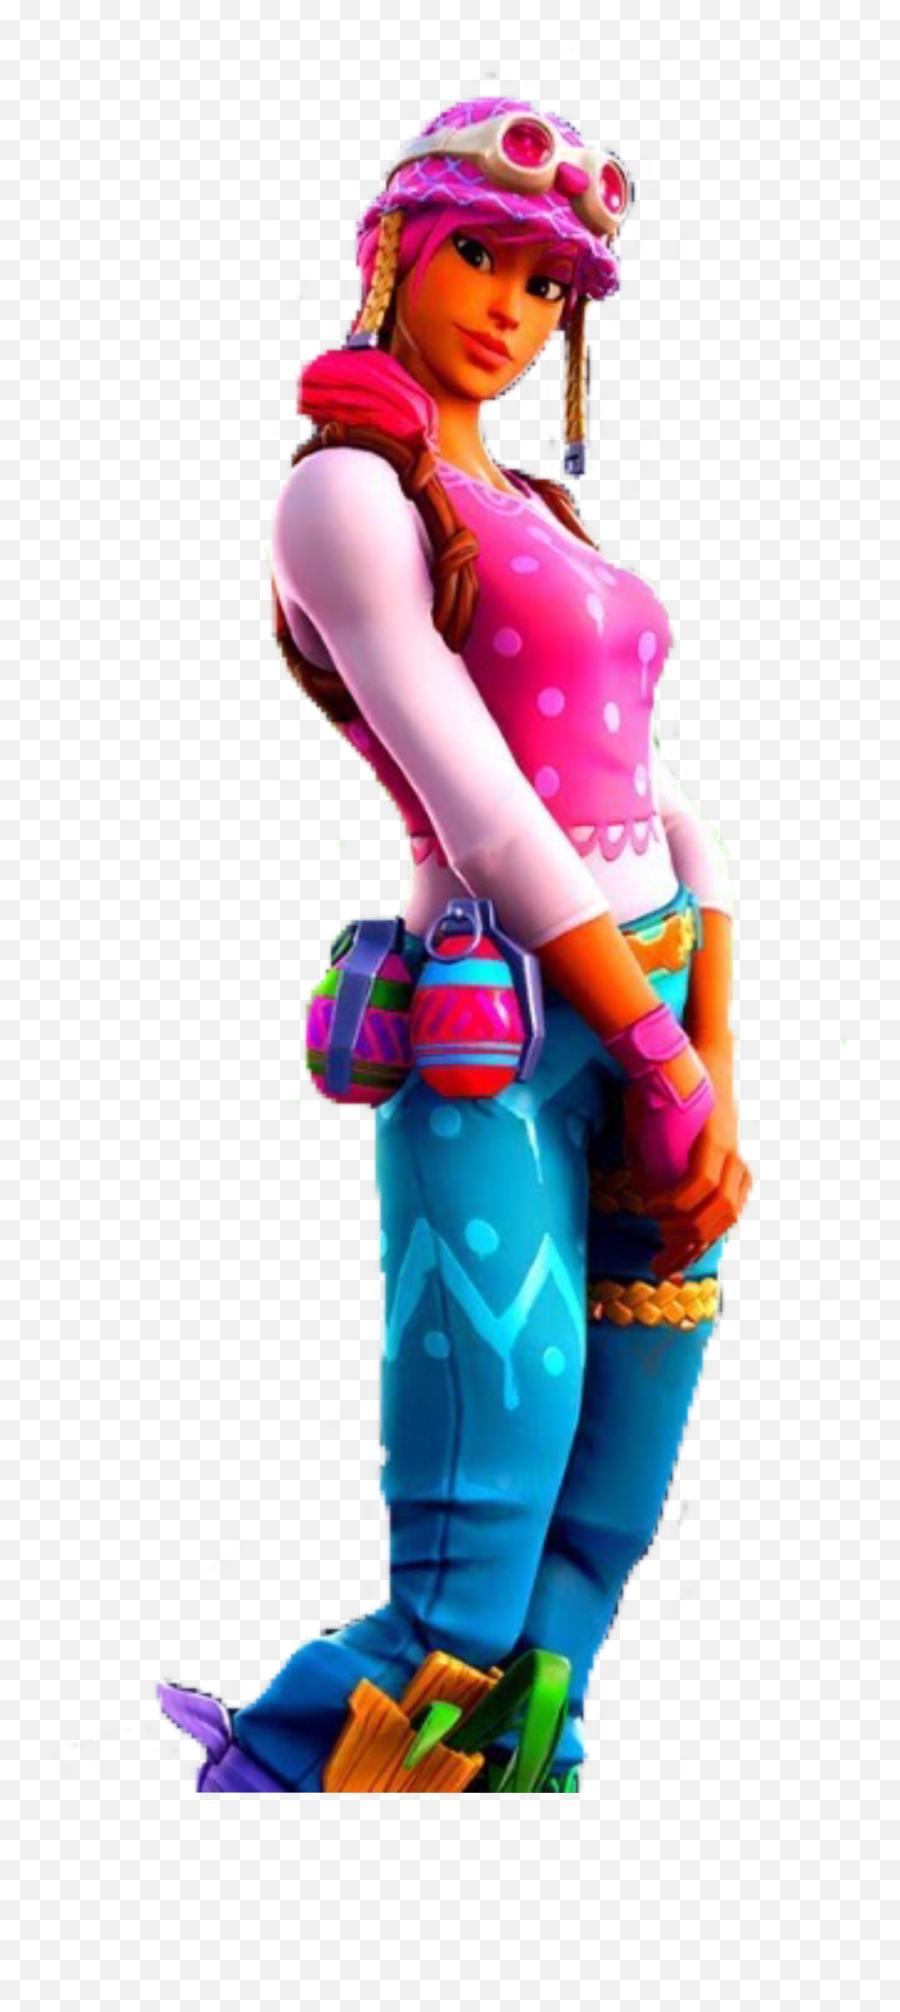 Fortnite Pastel Posted By Michelle Johnson - Fortnite Pastel Skin Png,Fortnite New Png